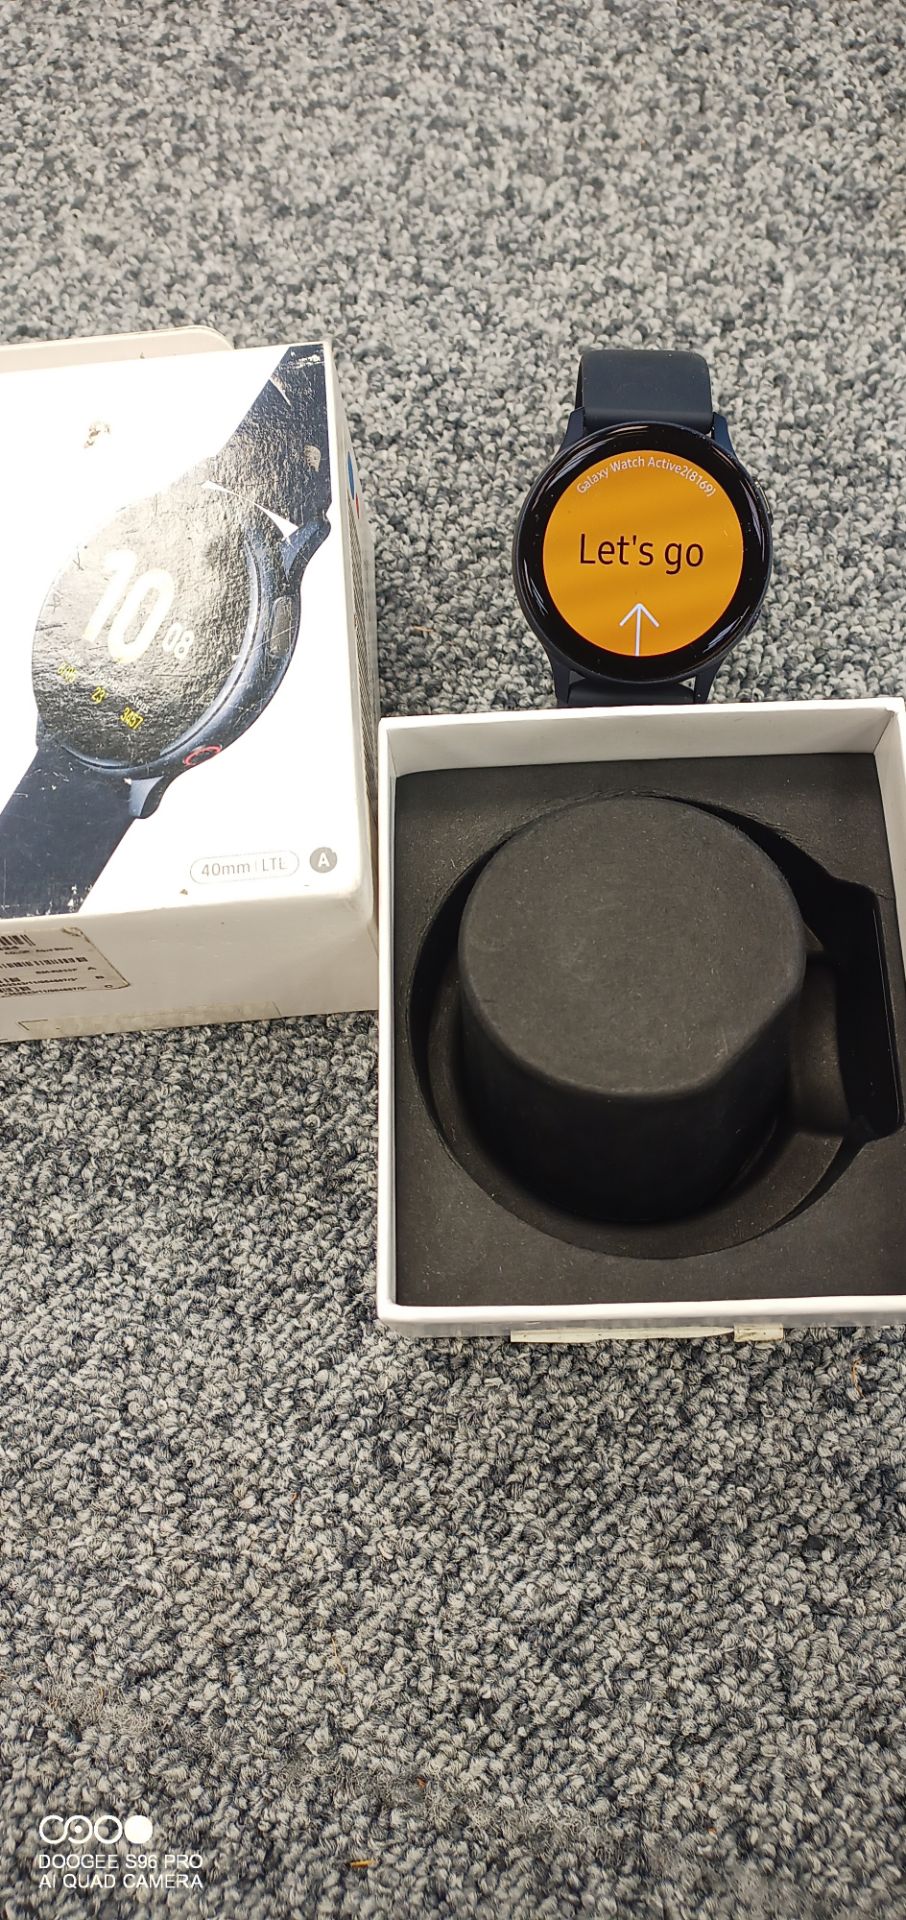 Samsung Active 2 watch - Black - untested unchecked with charger , boxed as pictured - Image 2 of 2